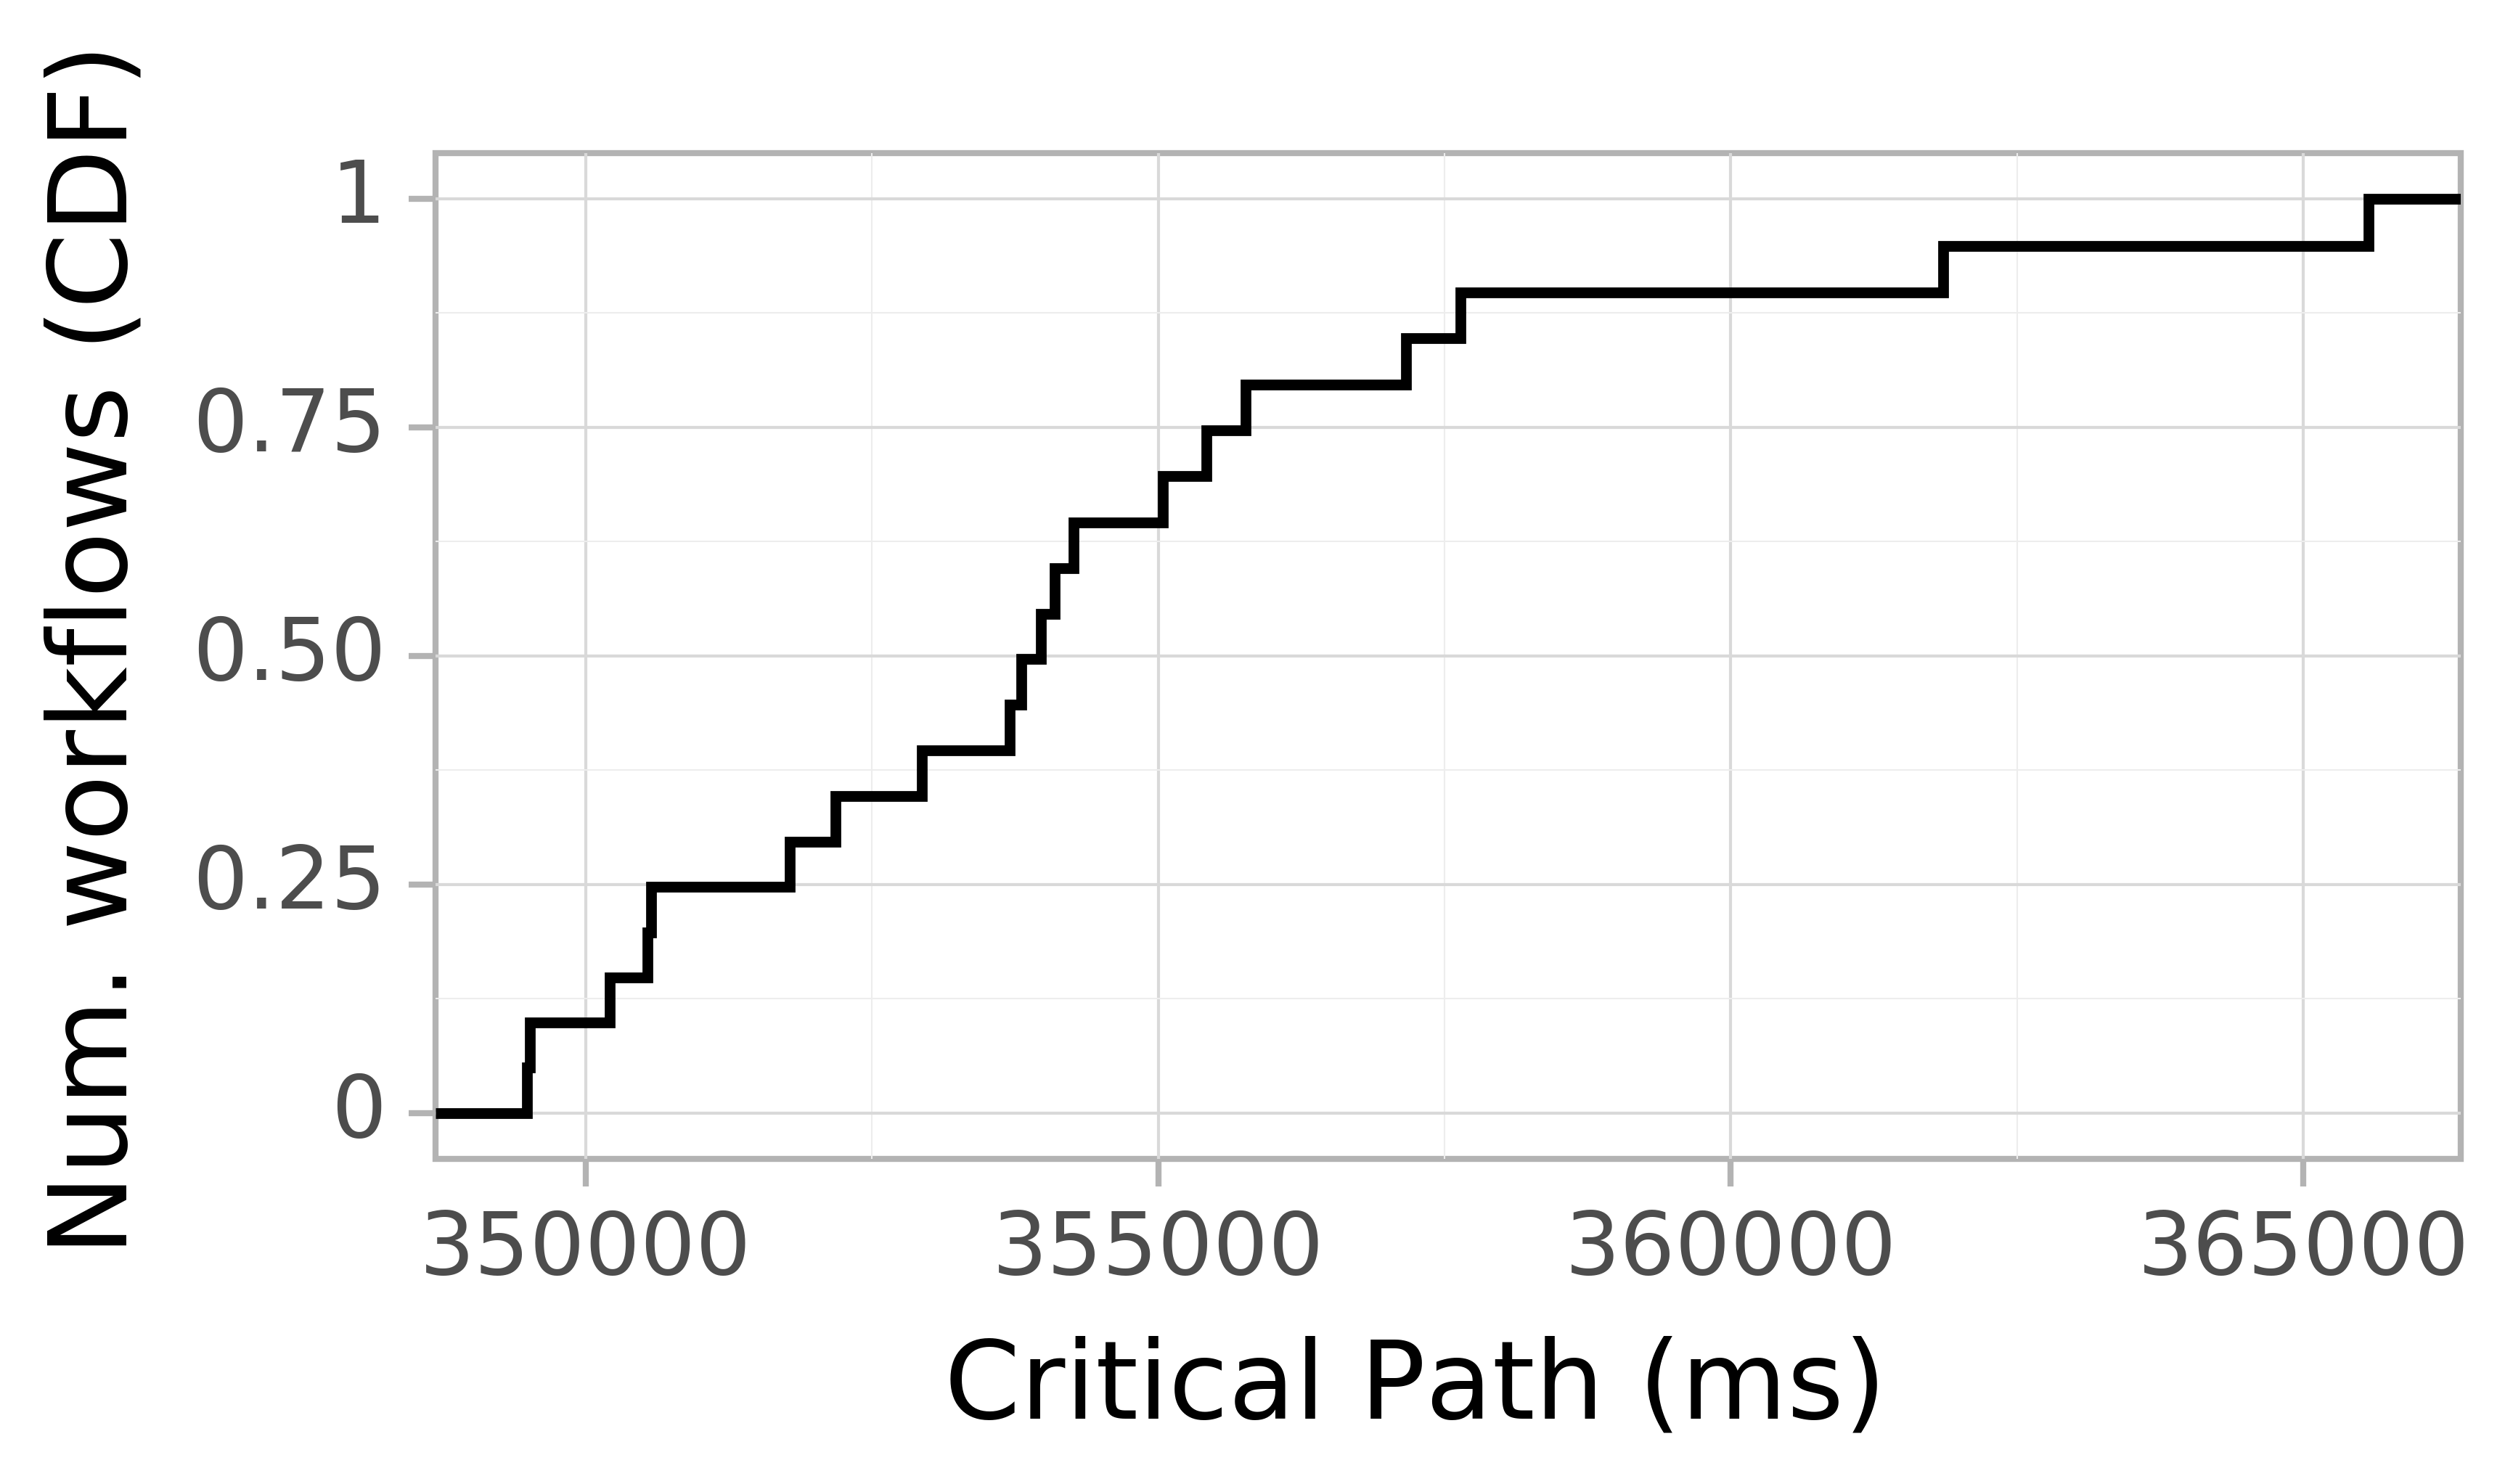 Job runtime CDF graph for the askalon-new_ee19 trace.